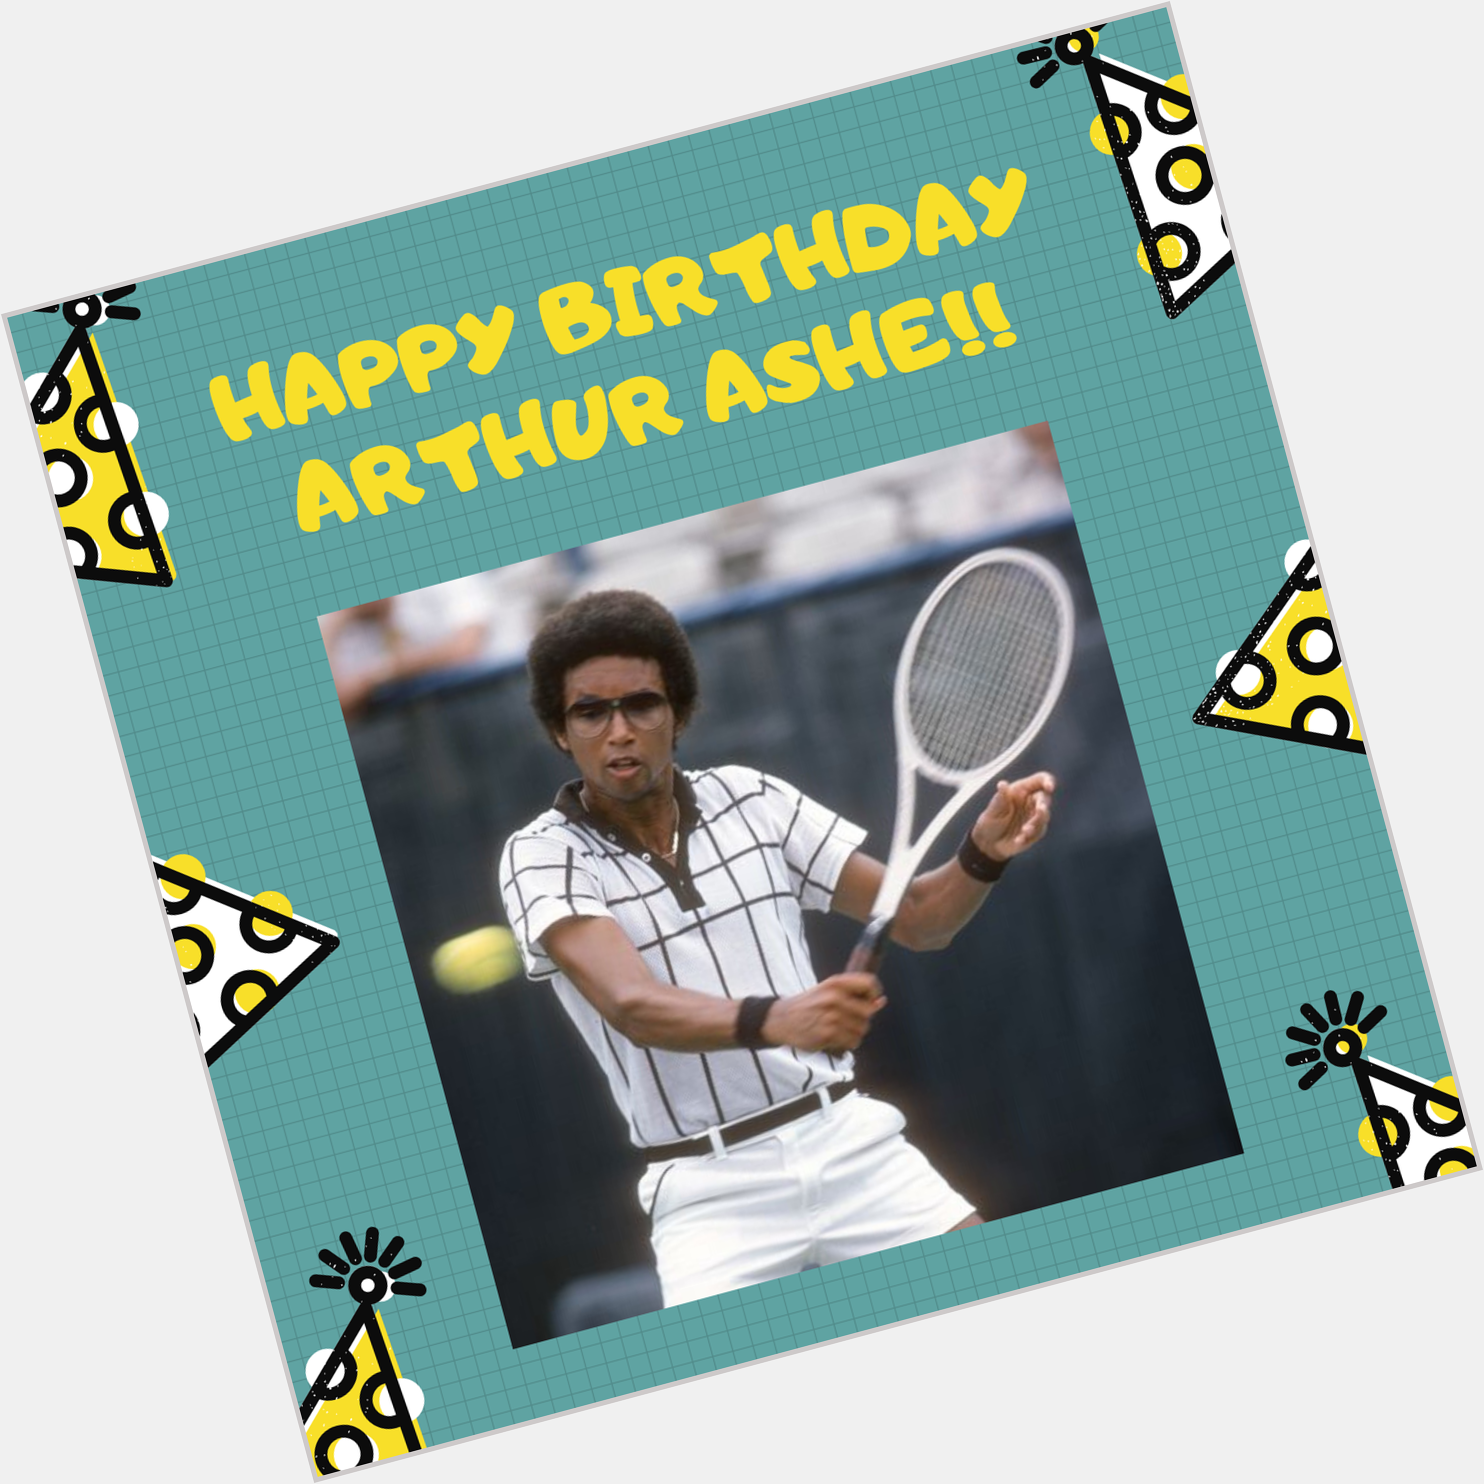 Happy Birthday Arthur Ashe! This legend and Richmond native would have been 77 today! 